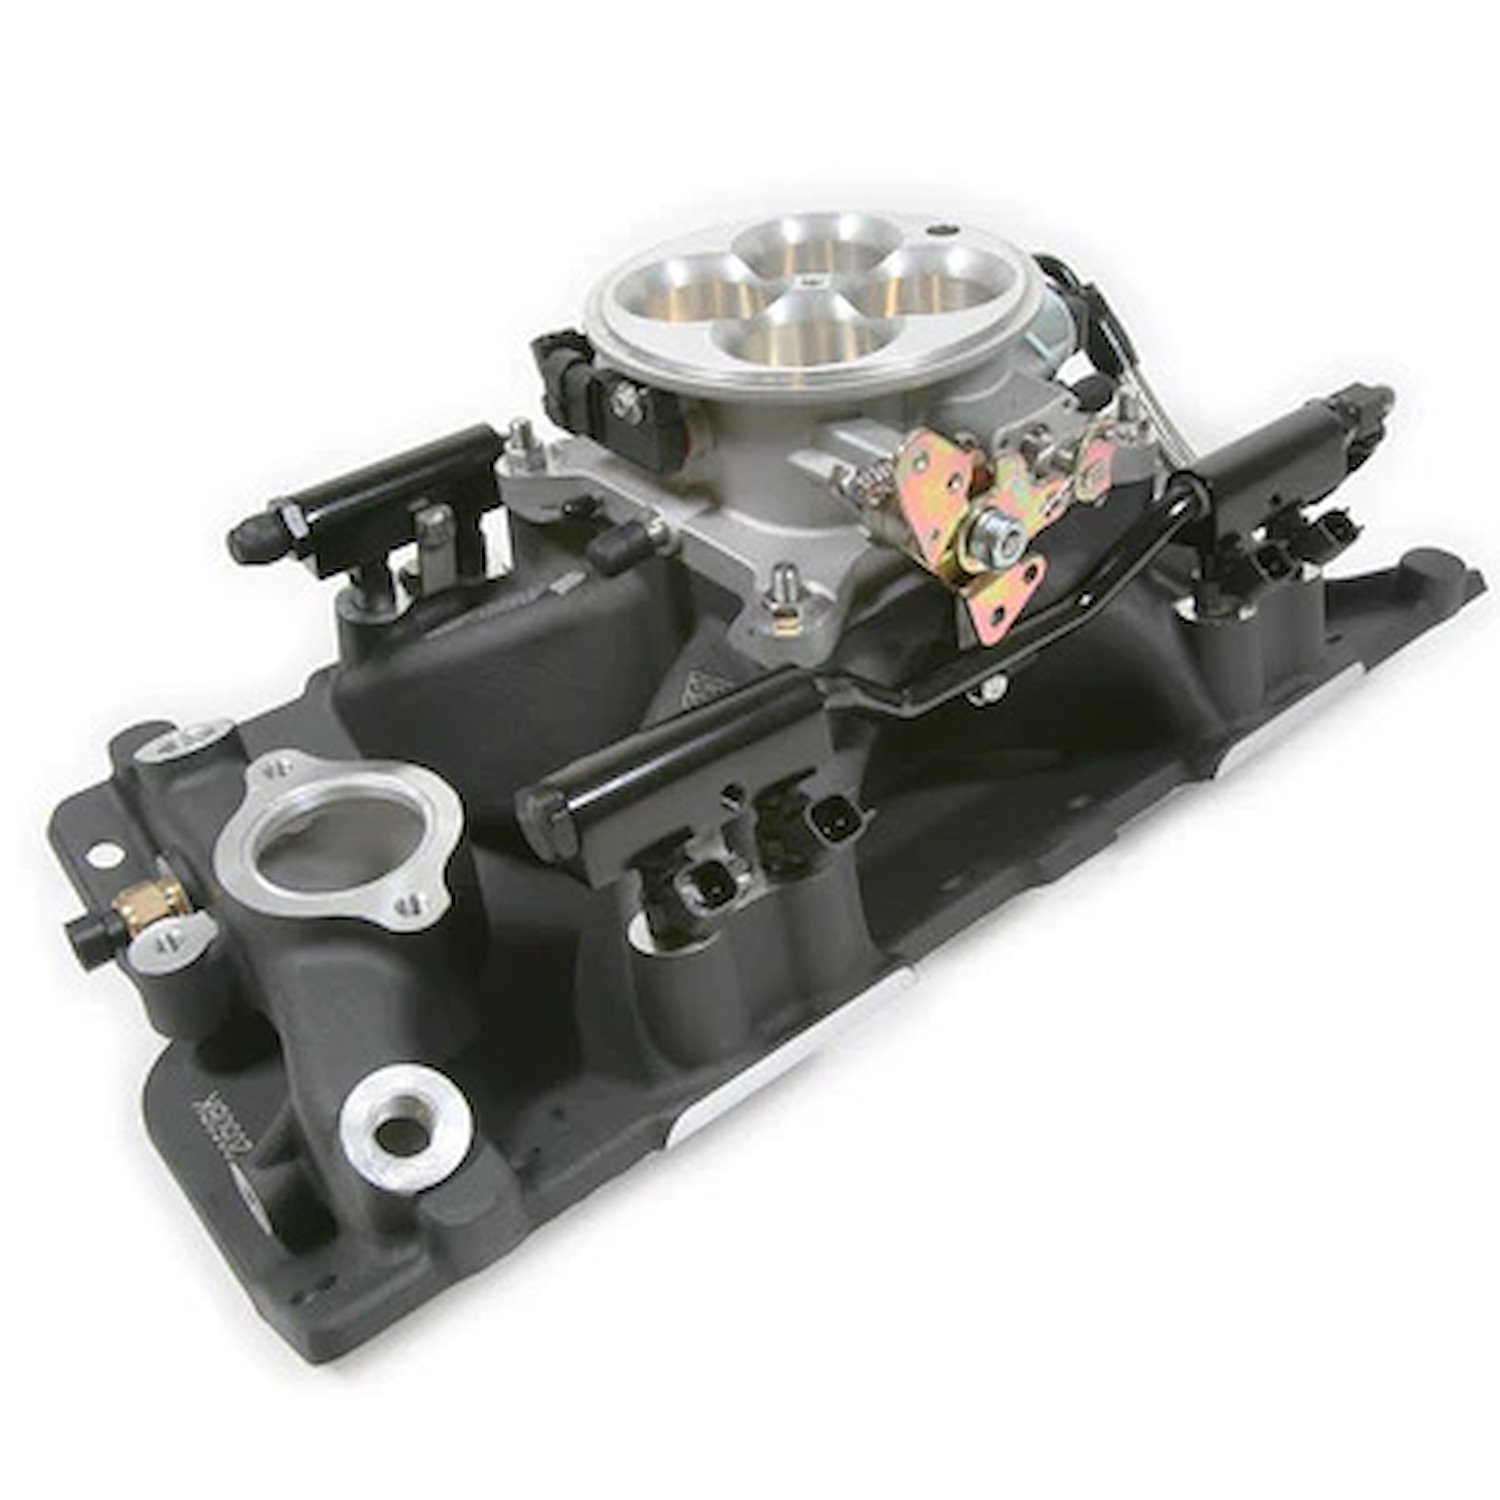 AS2015P-SBC-B2060 The Joker EFI Standalone Management System, Small Block Chevy, with Black AM2060 Intake Manifold